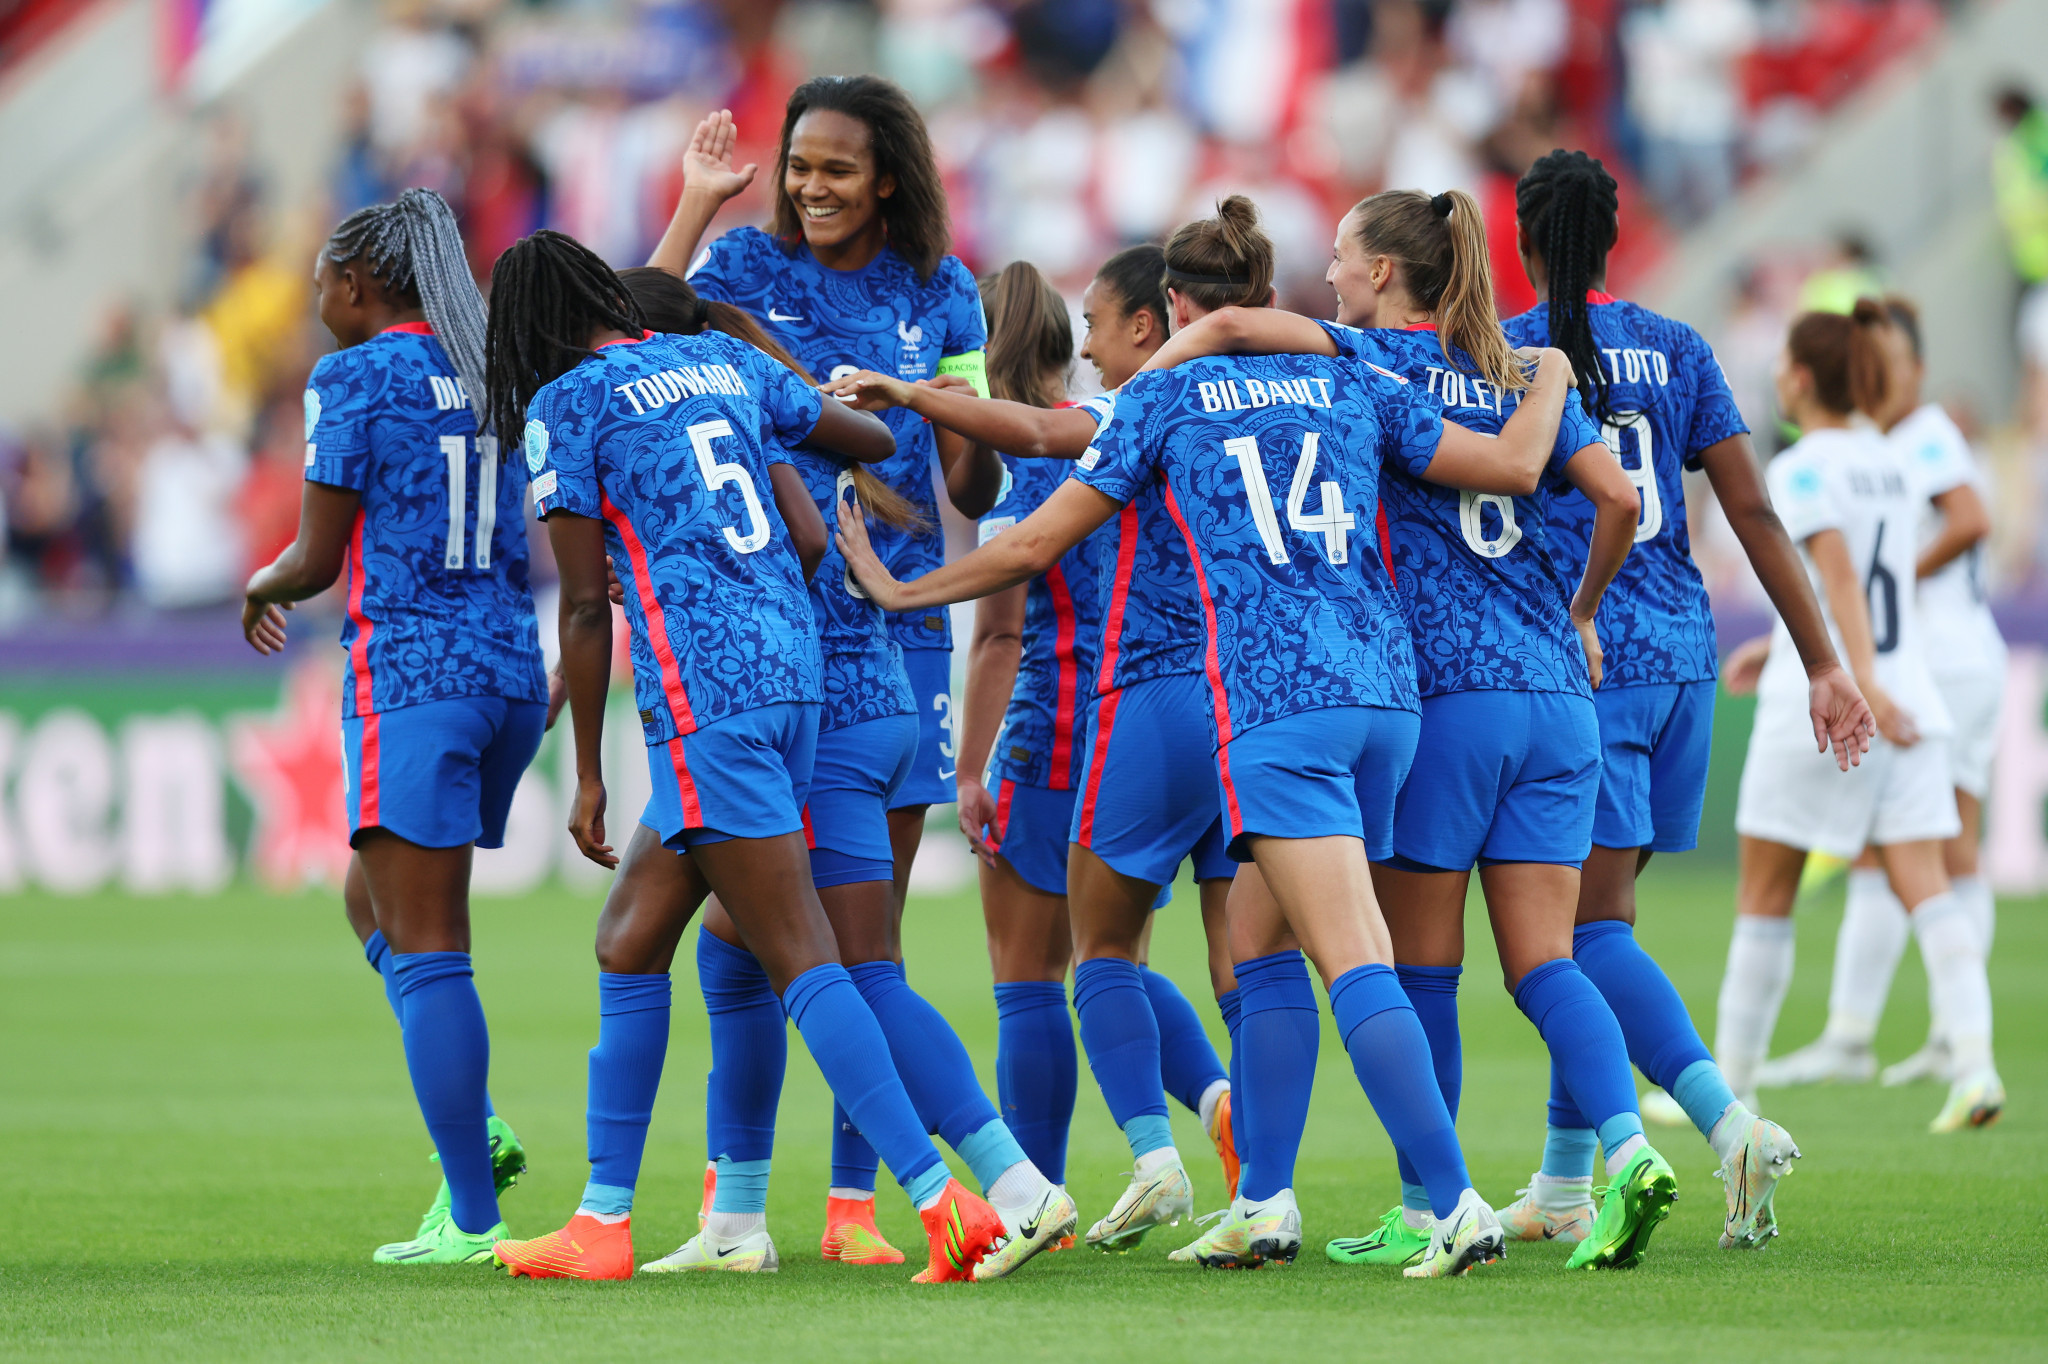 France produced a historic performance in their opening Group D match against Italy ©Getty Images